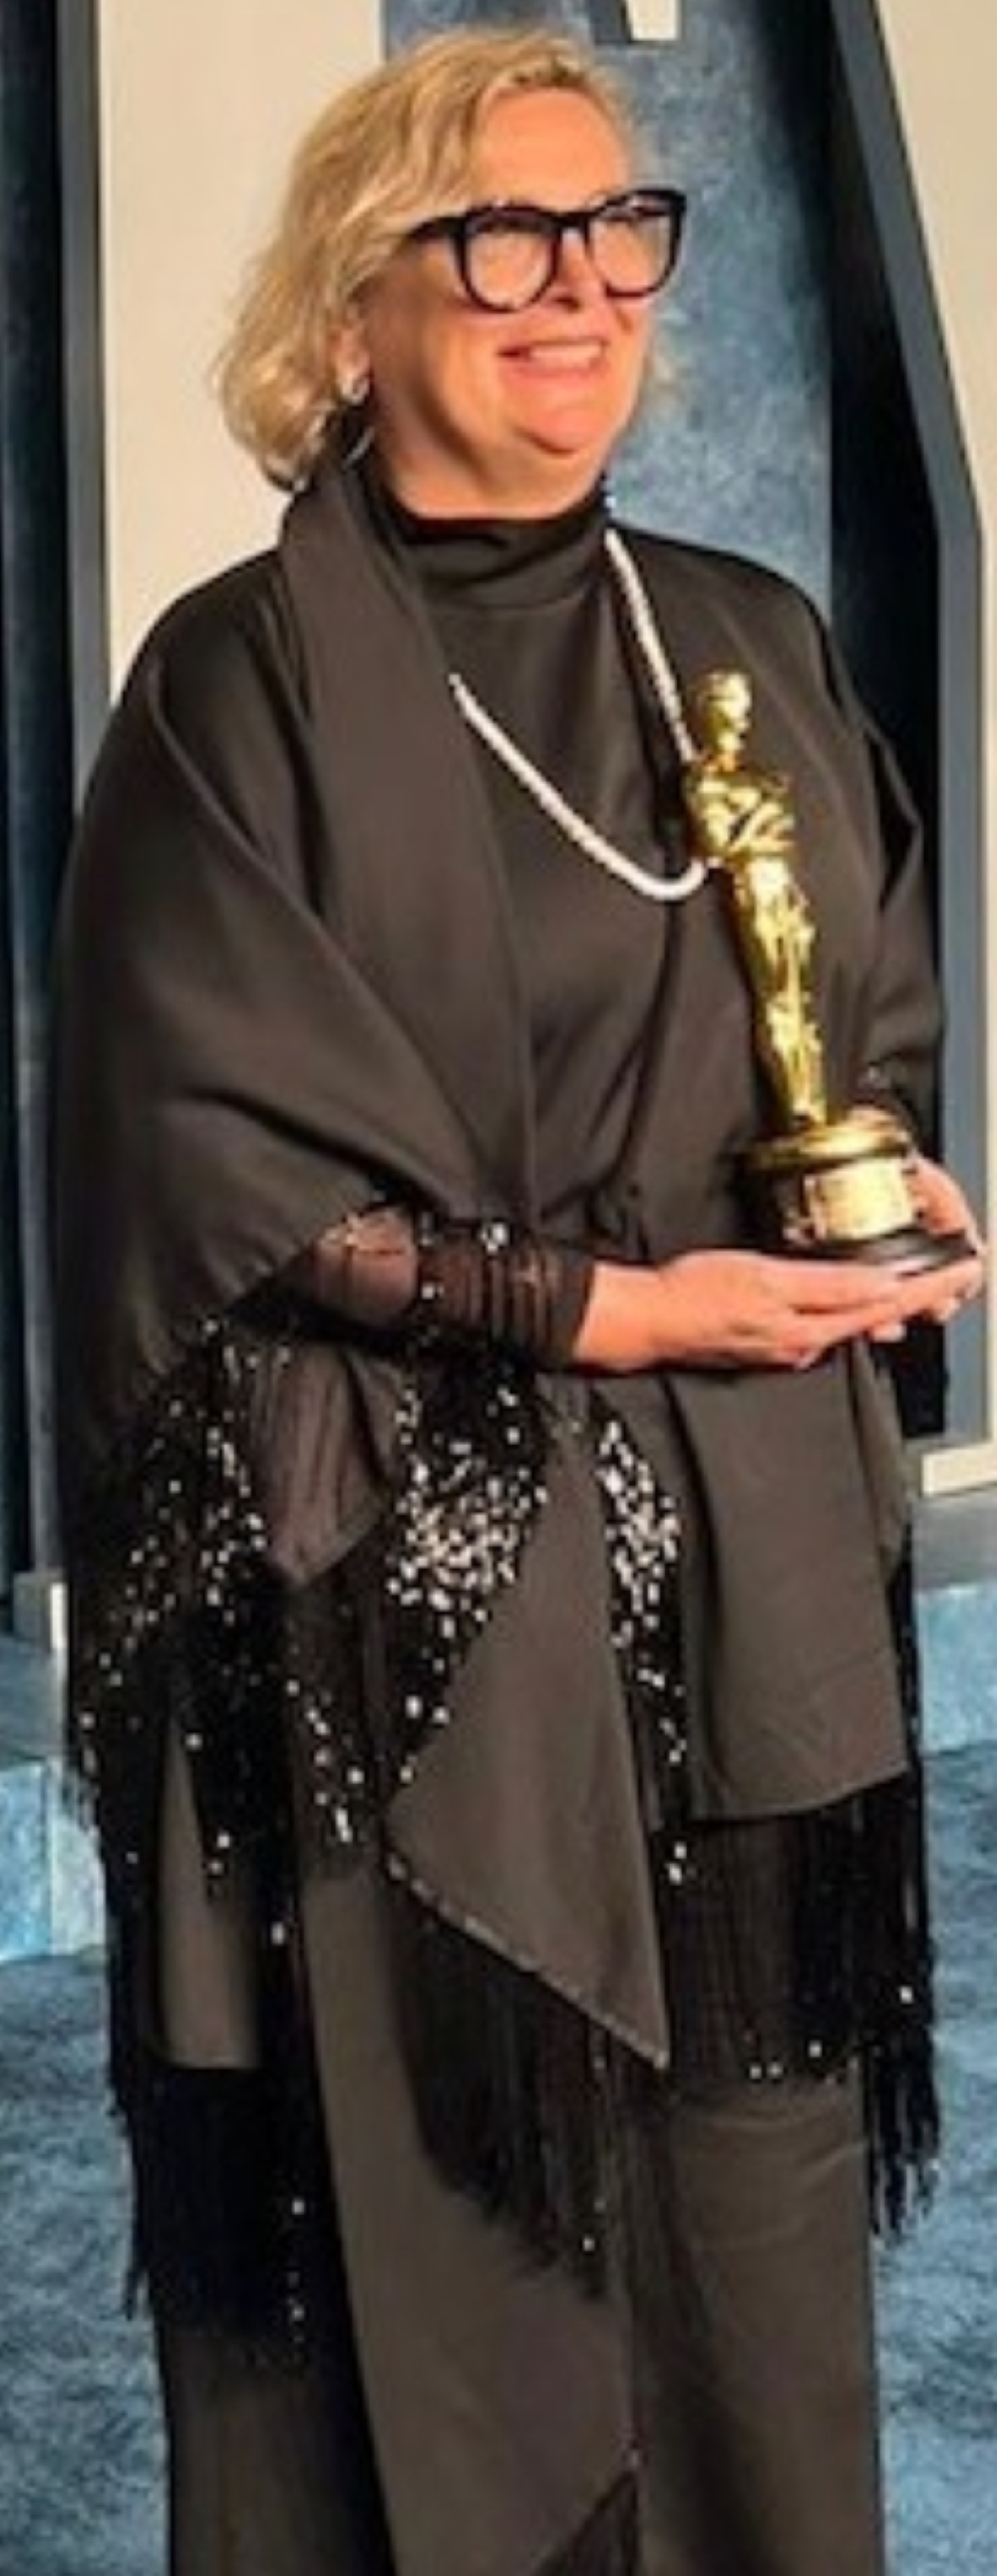 Ernestine Hipper received an Oscar at the 95th Academy Awards by the Academy of Motion Picture Arts and Sciences (AMPAS) on March 12, 2023 for the set decoration of the movie 'All Quiet on the Western Front'.